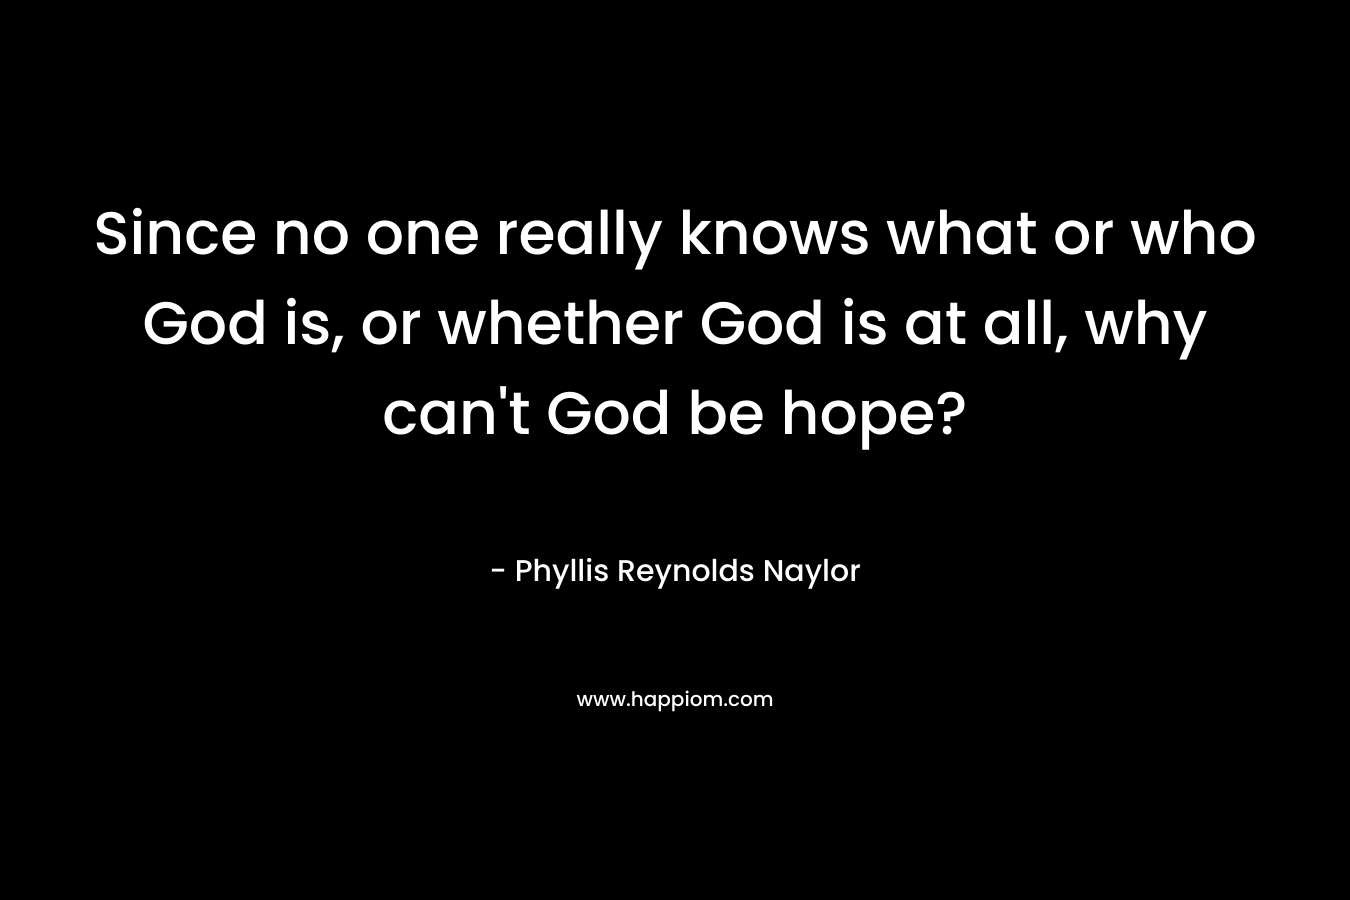 Since no one really knows what or who God is, or whether God is at all, why can’t God be hope? – Phyllis Reynolds Naylor